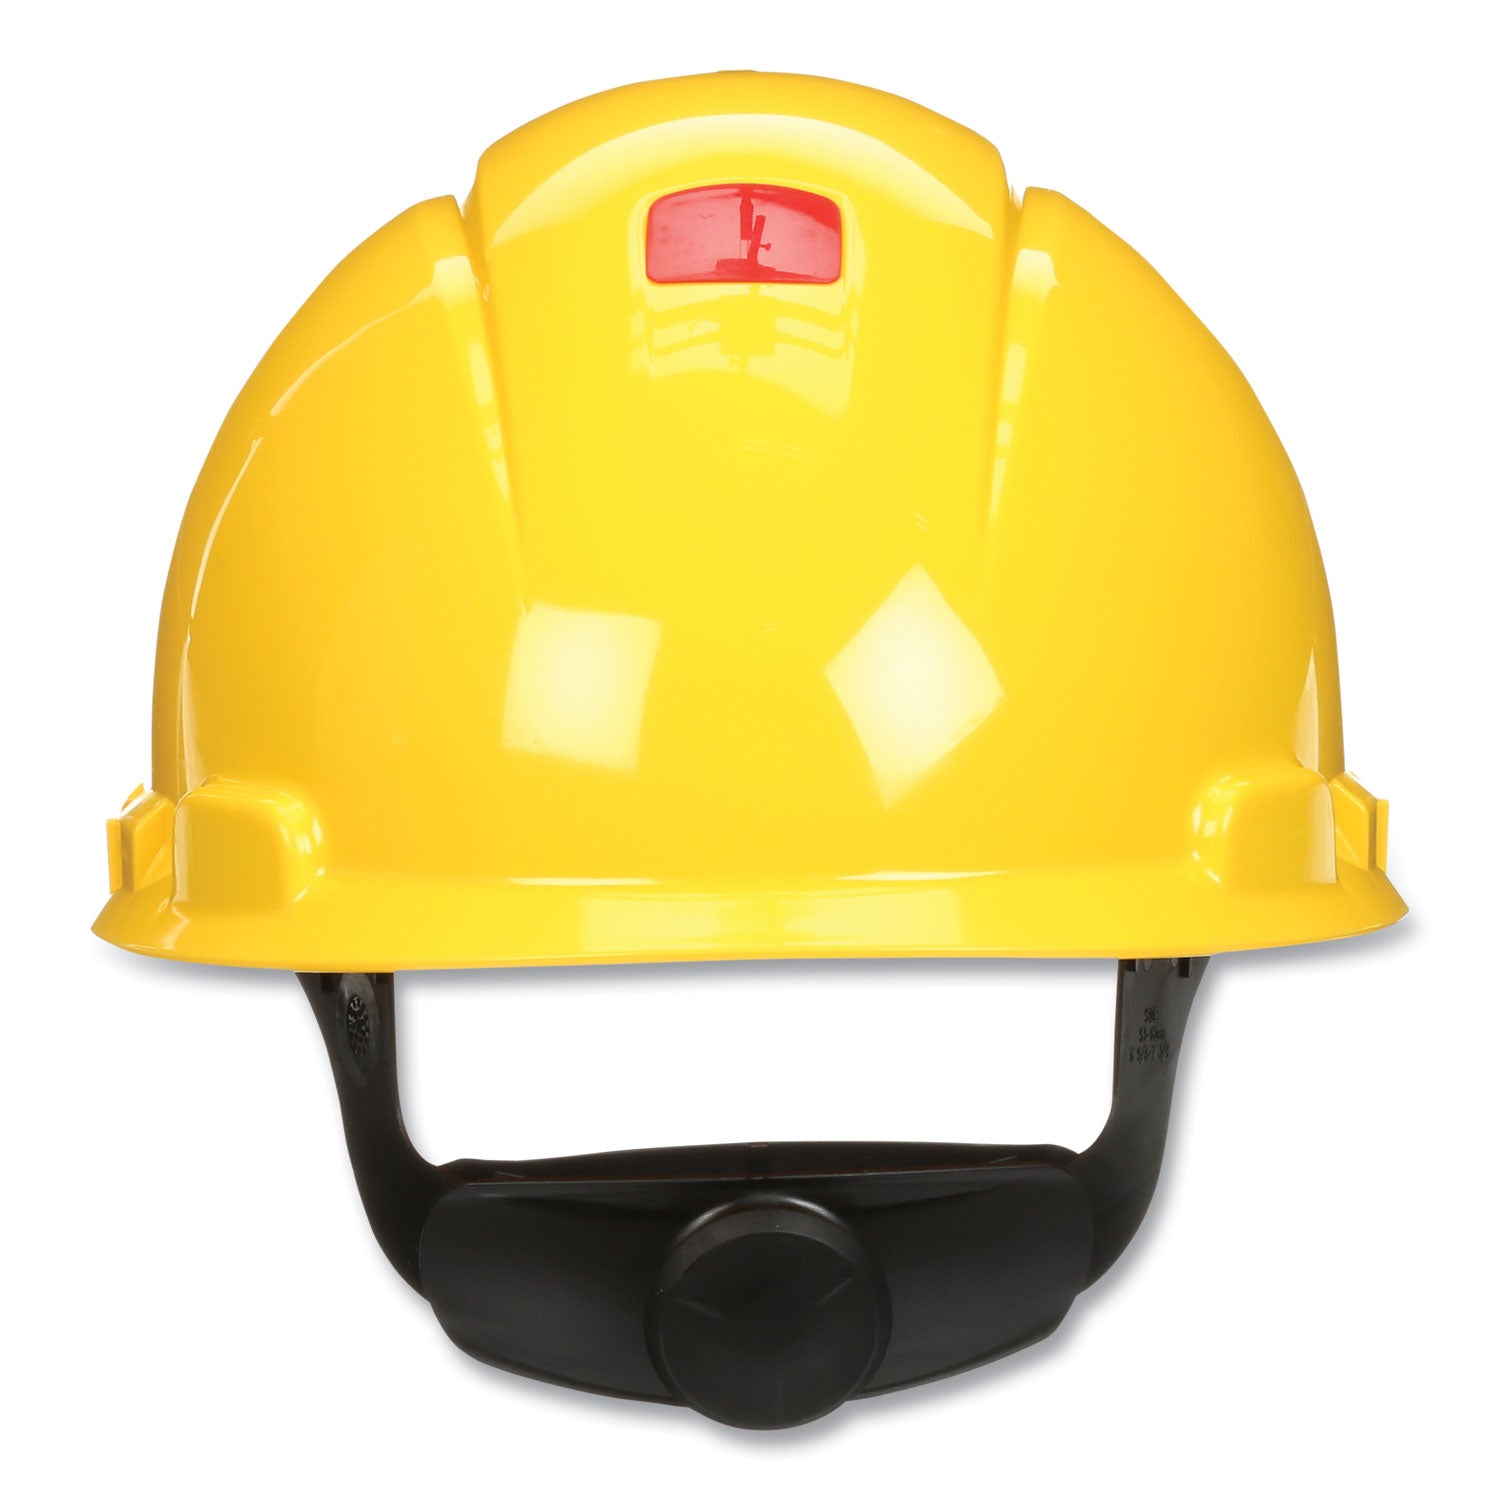 securefit-h-series-hard-hats-h-700-vented-cap-with-uv-indicator-4-point-pressure-diffusion-ratchet-suspension-yellow_mmmh702sfvuv - 2